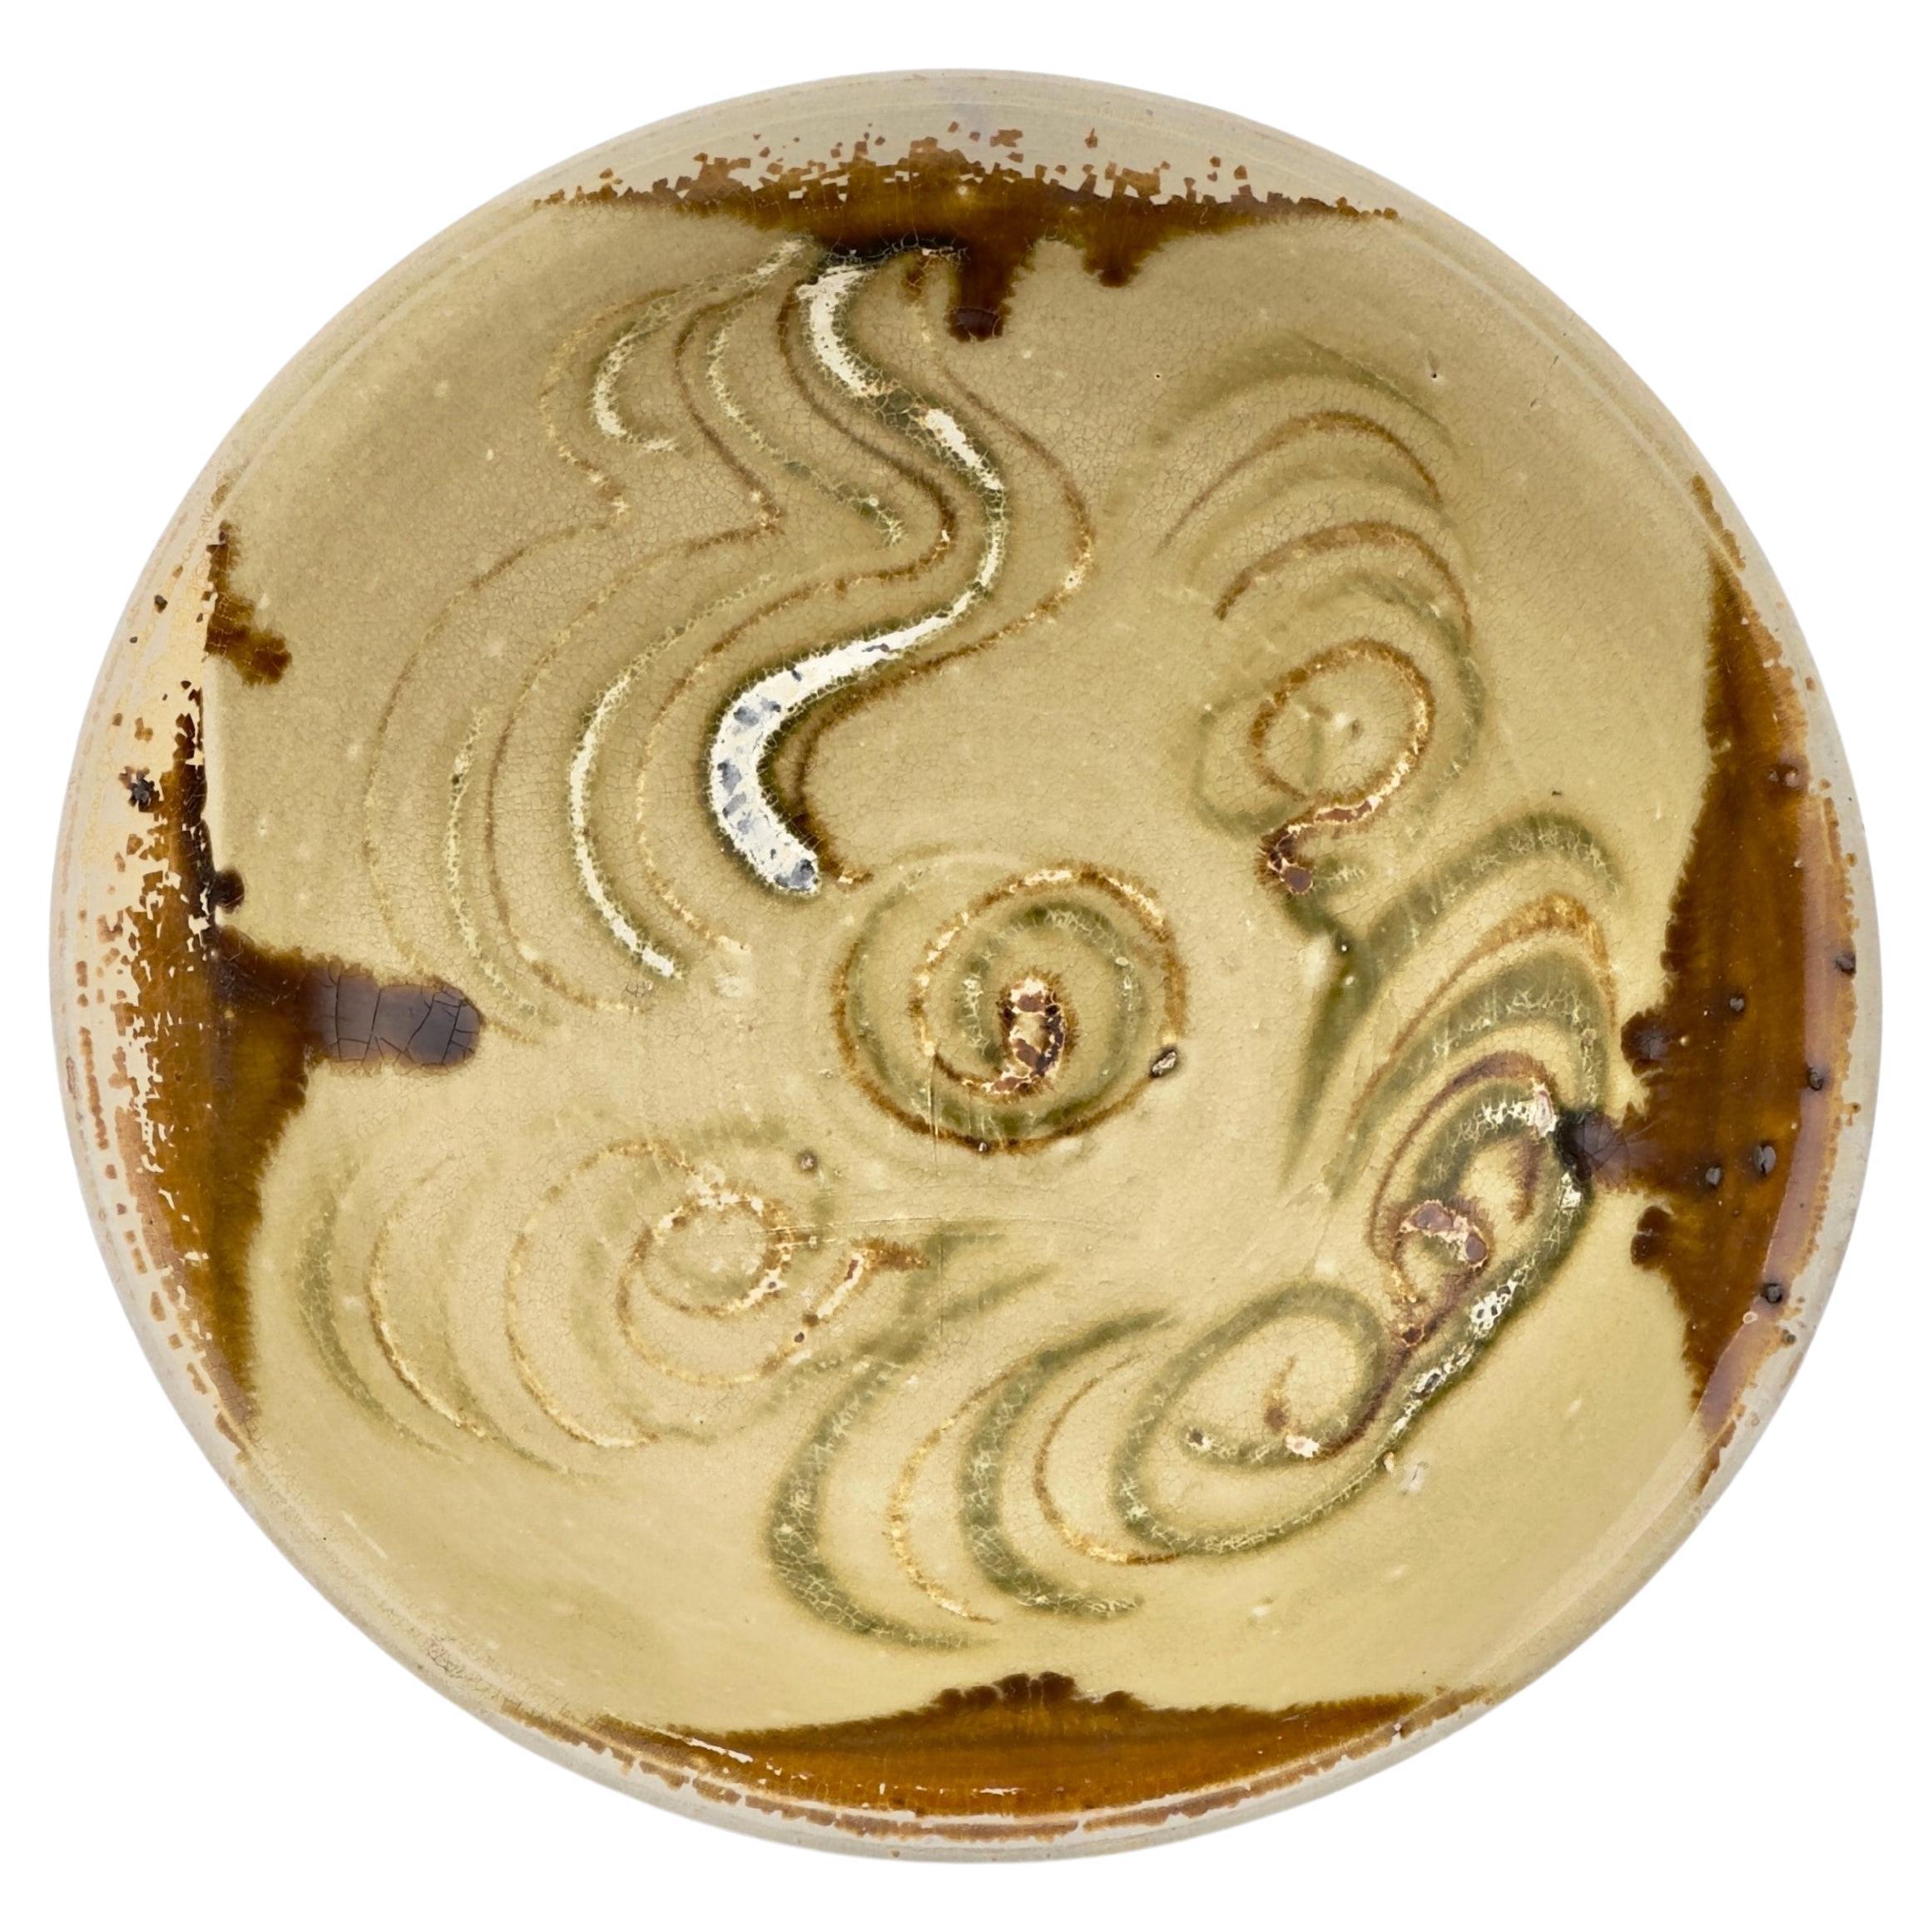 Changsha bowl with cloud or wind patterns, Tang Dynasty